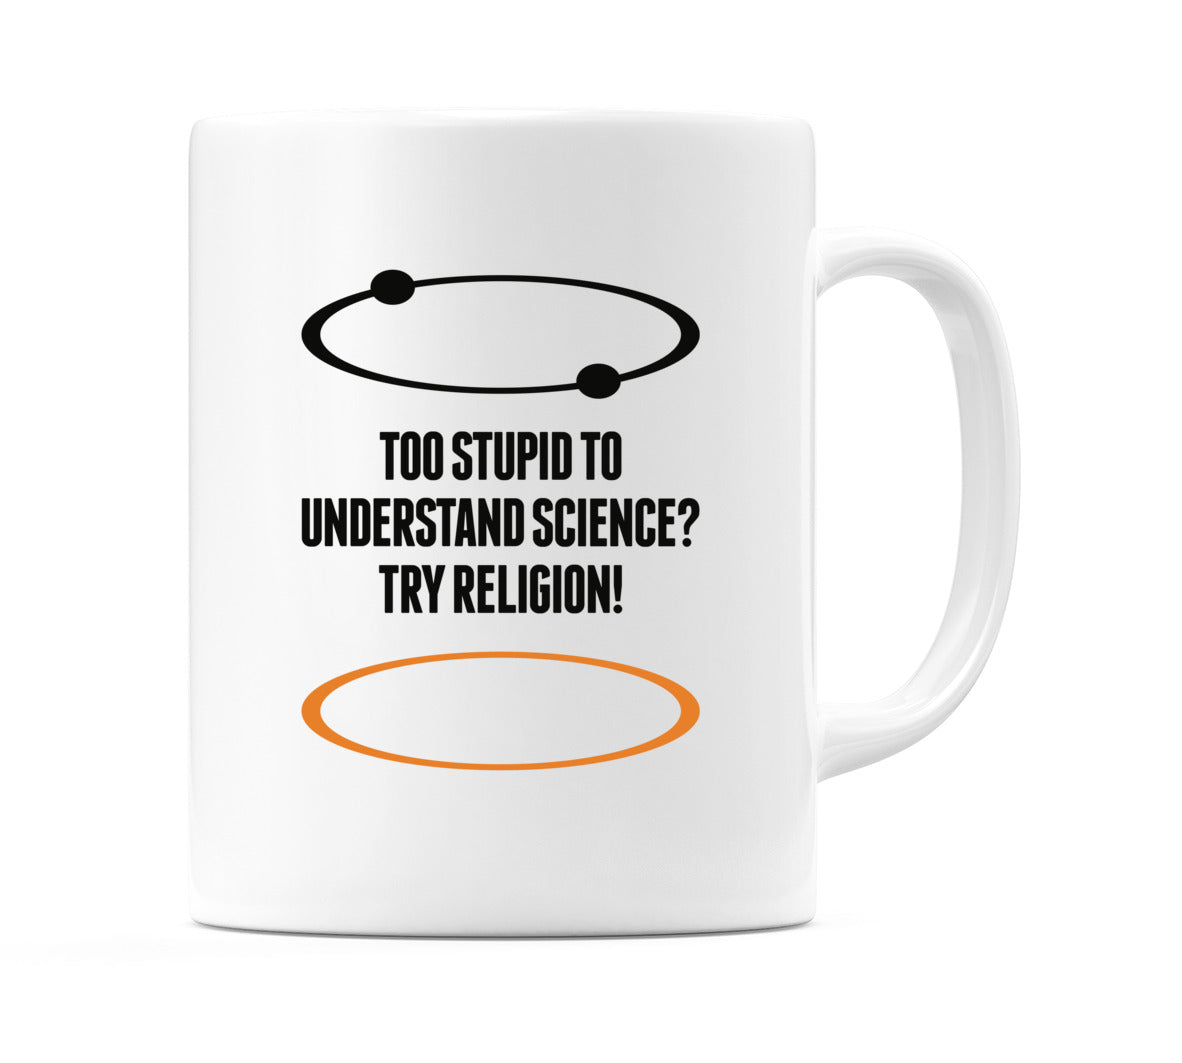 Too Stupid To Understand Science? Try Religion! Mug